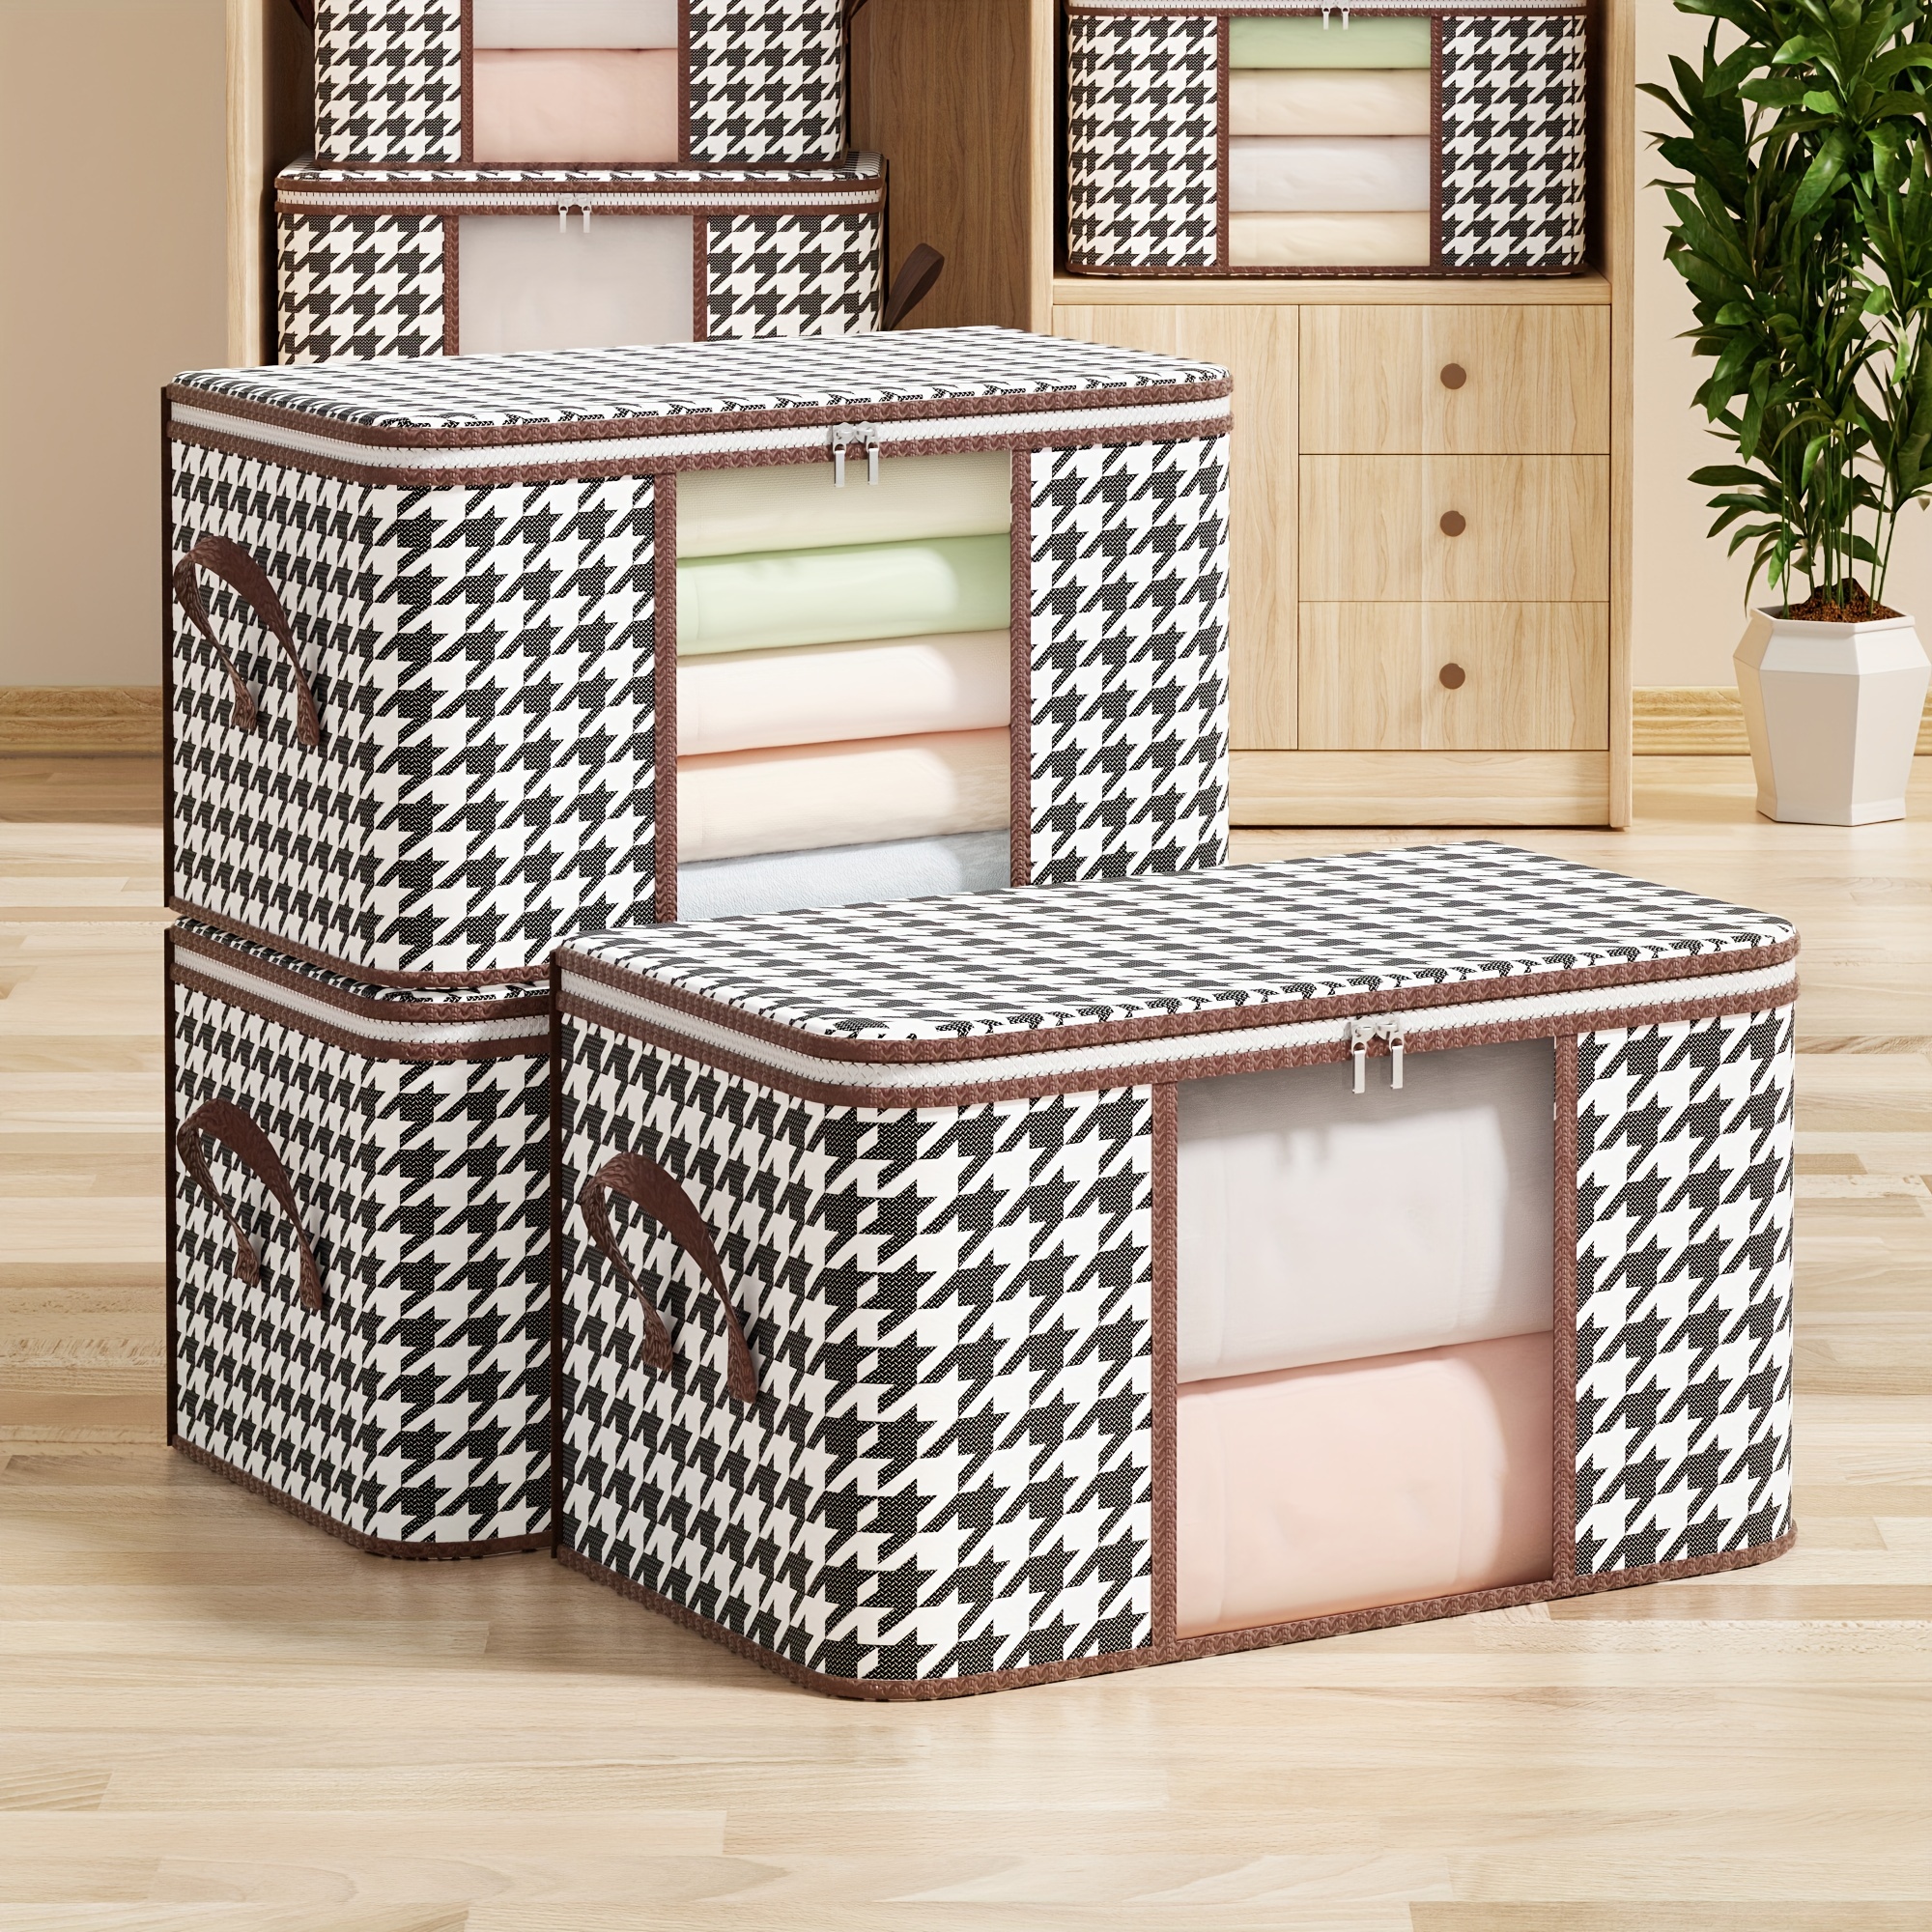 Houndstooth Blanket Storage Bags With Zipper, Foldable Comforter